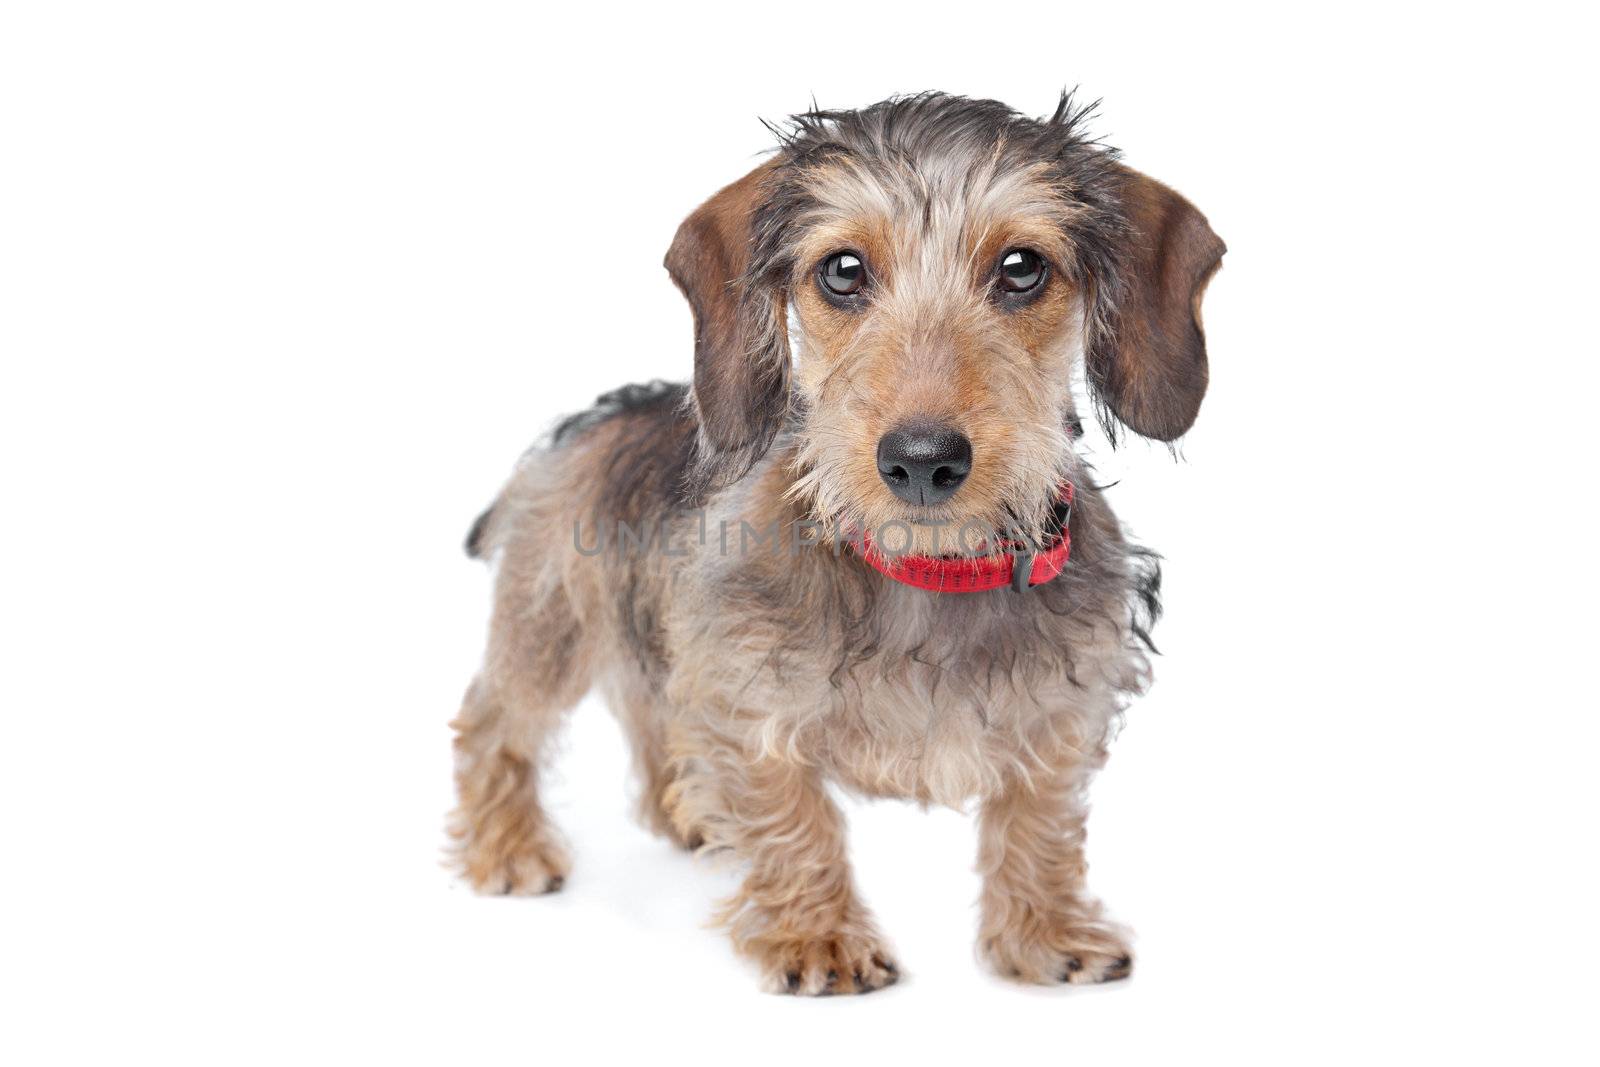 Wire-haired Dachshund in front of a white background